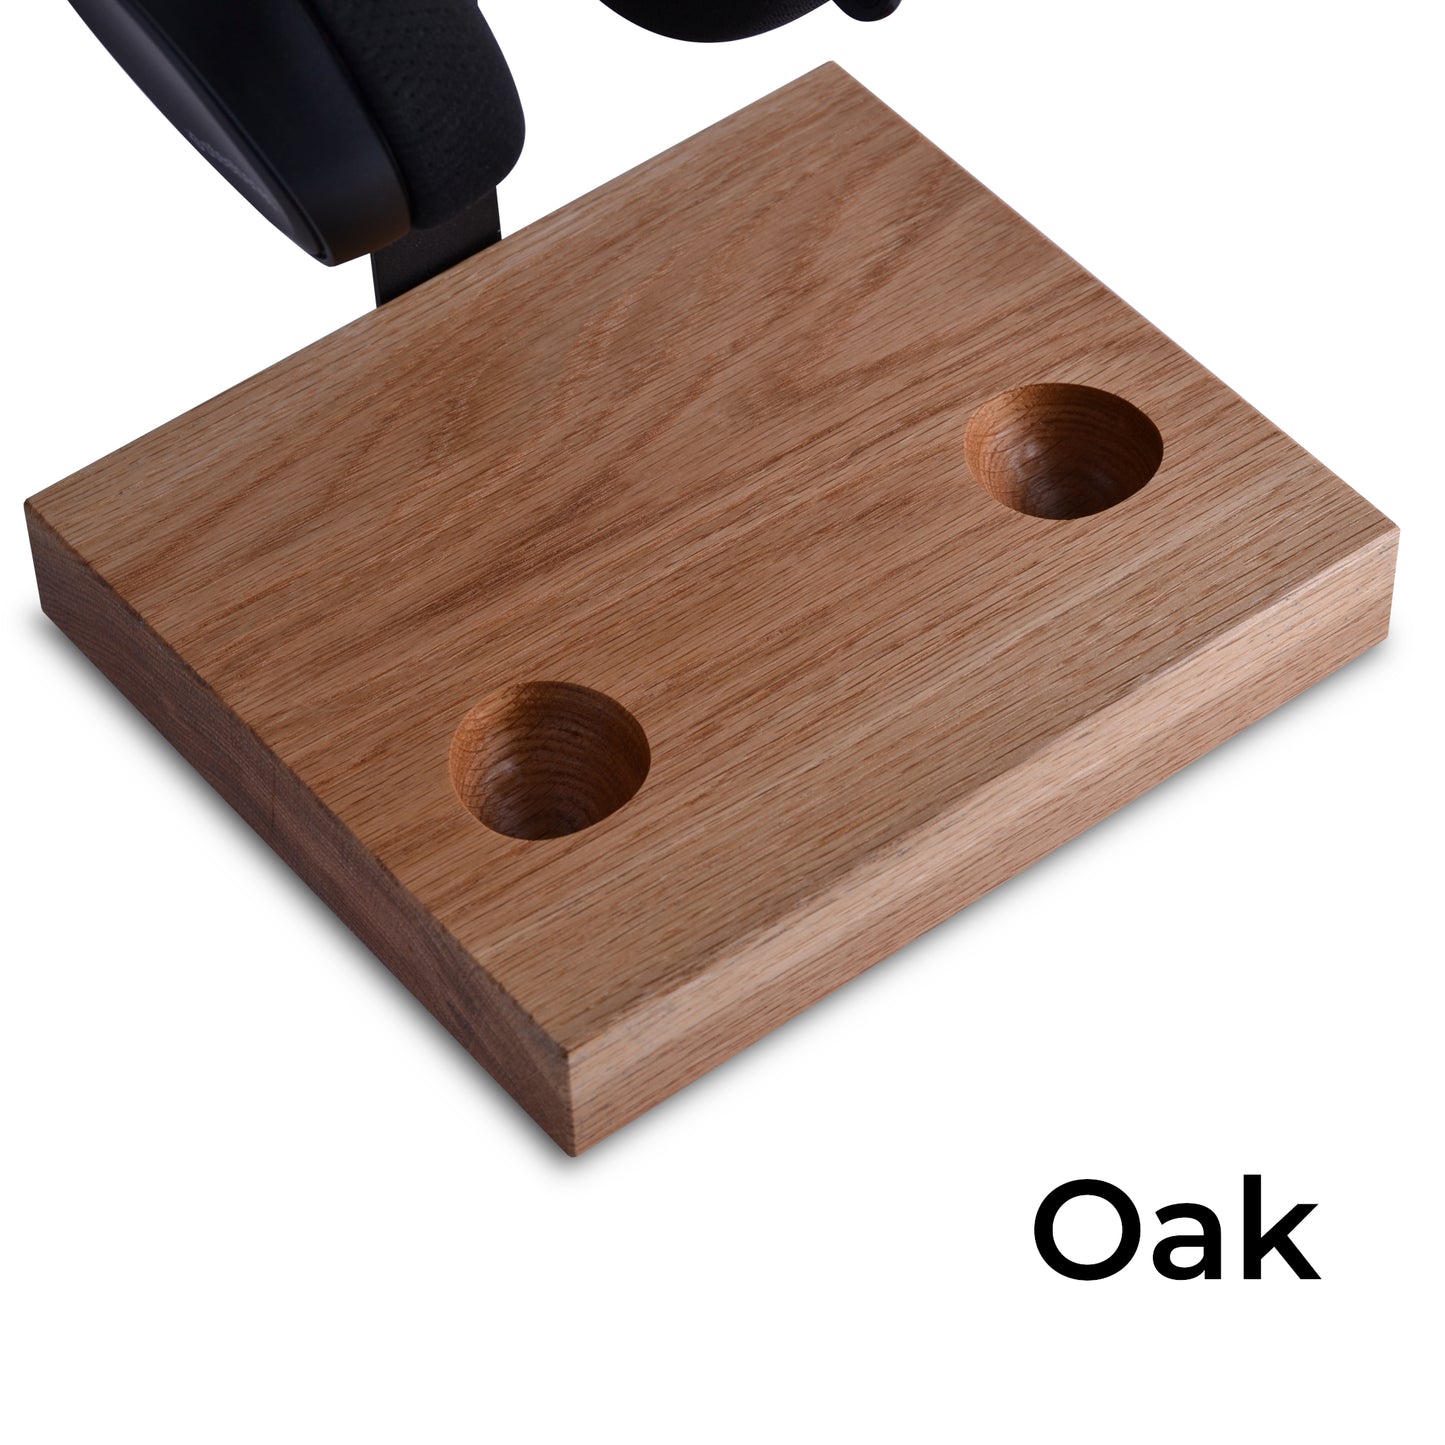 Oak version of headset and controller stand for Xbox one controller